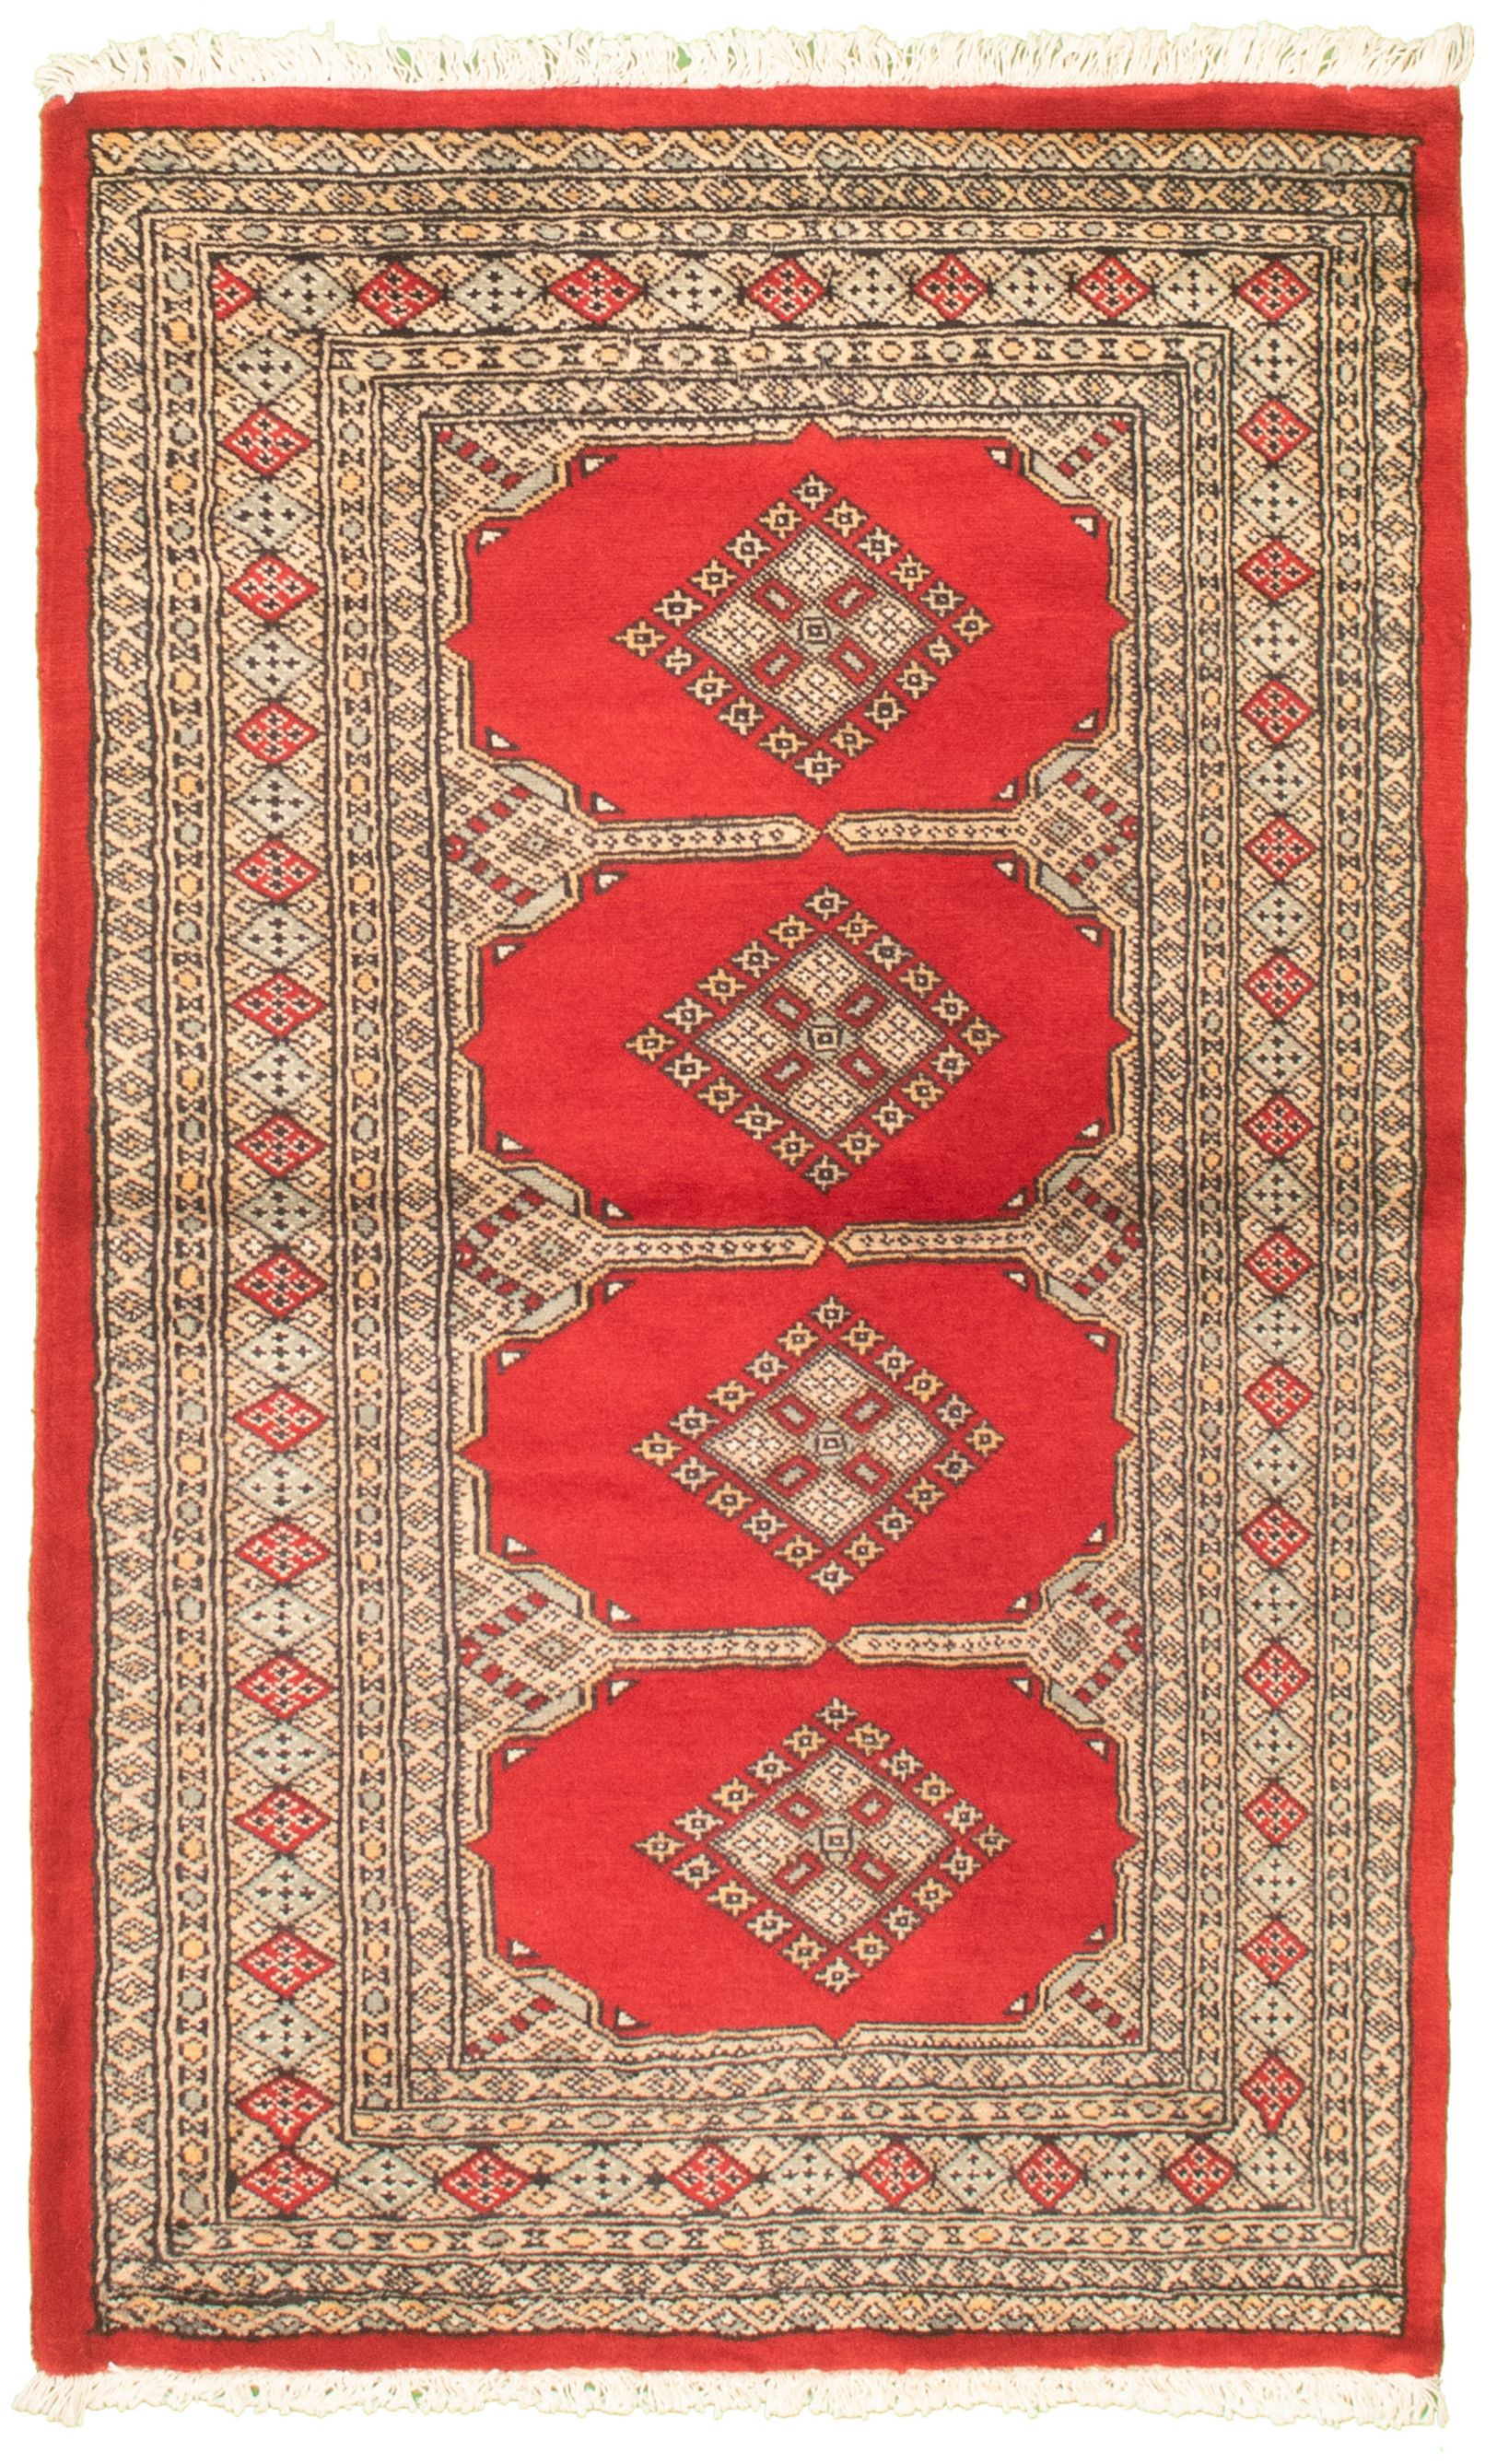 Hand-knotted Finest Peshawar Bokhara Red Wool Rug 3'2" x 5'2"  Size: 3'2" x 5'2"  